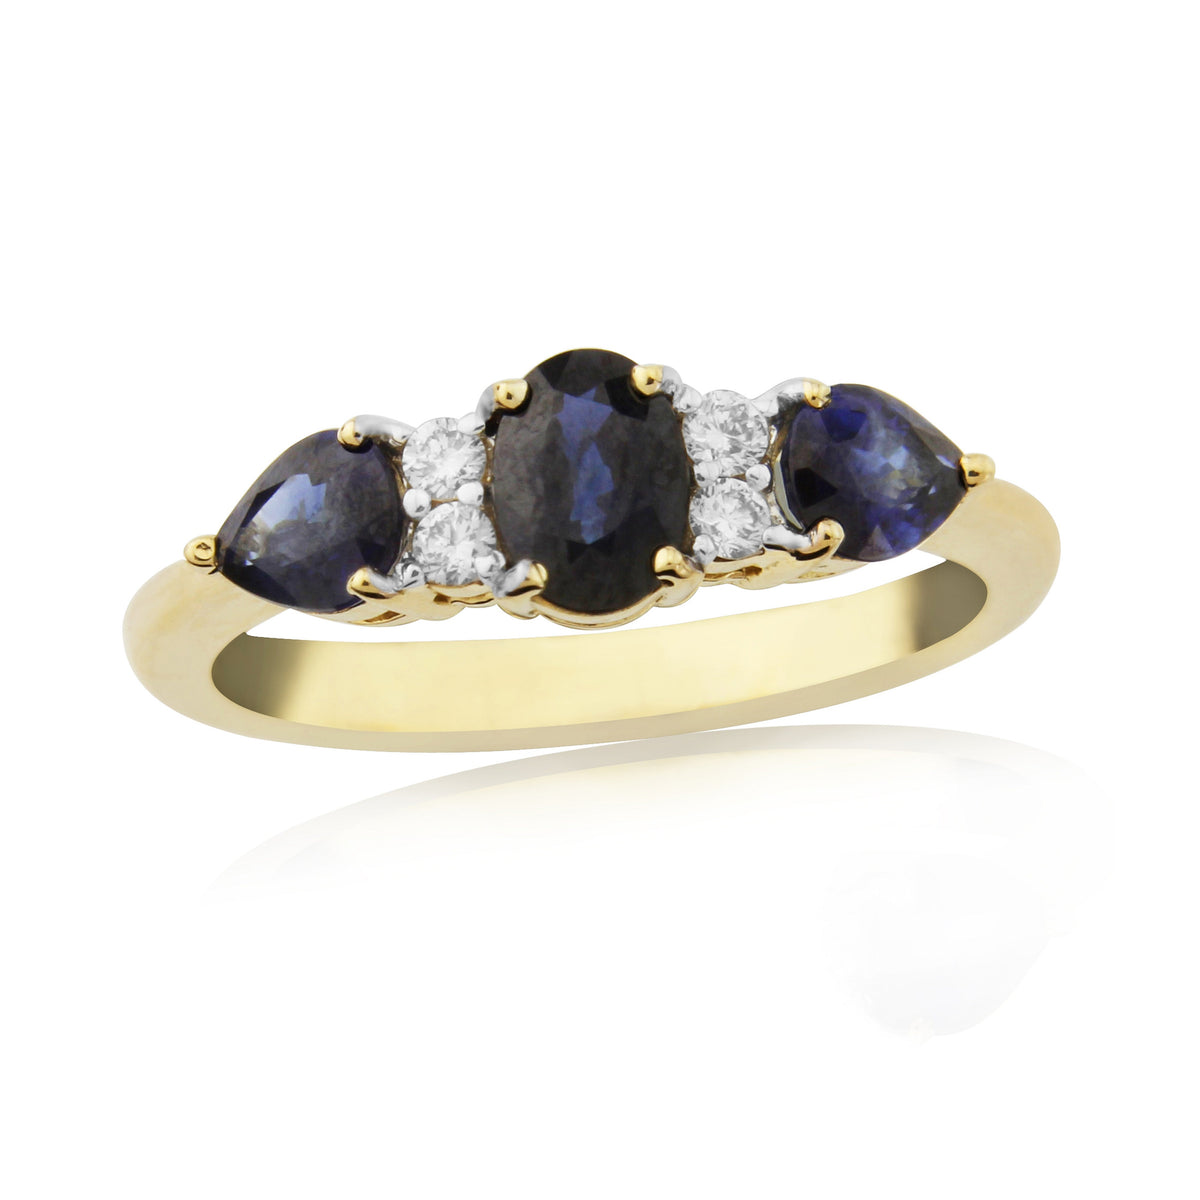 9ct 6x4mm oval sapphire with two 5x4mm pear shape sapphires &amp; diamond ring 0.11ct